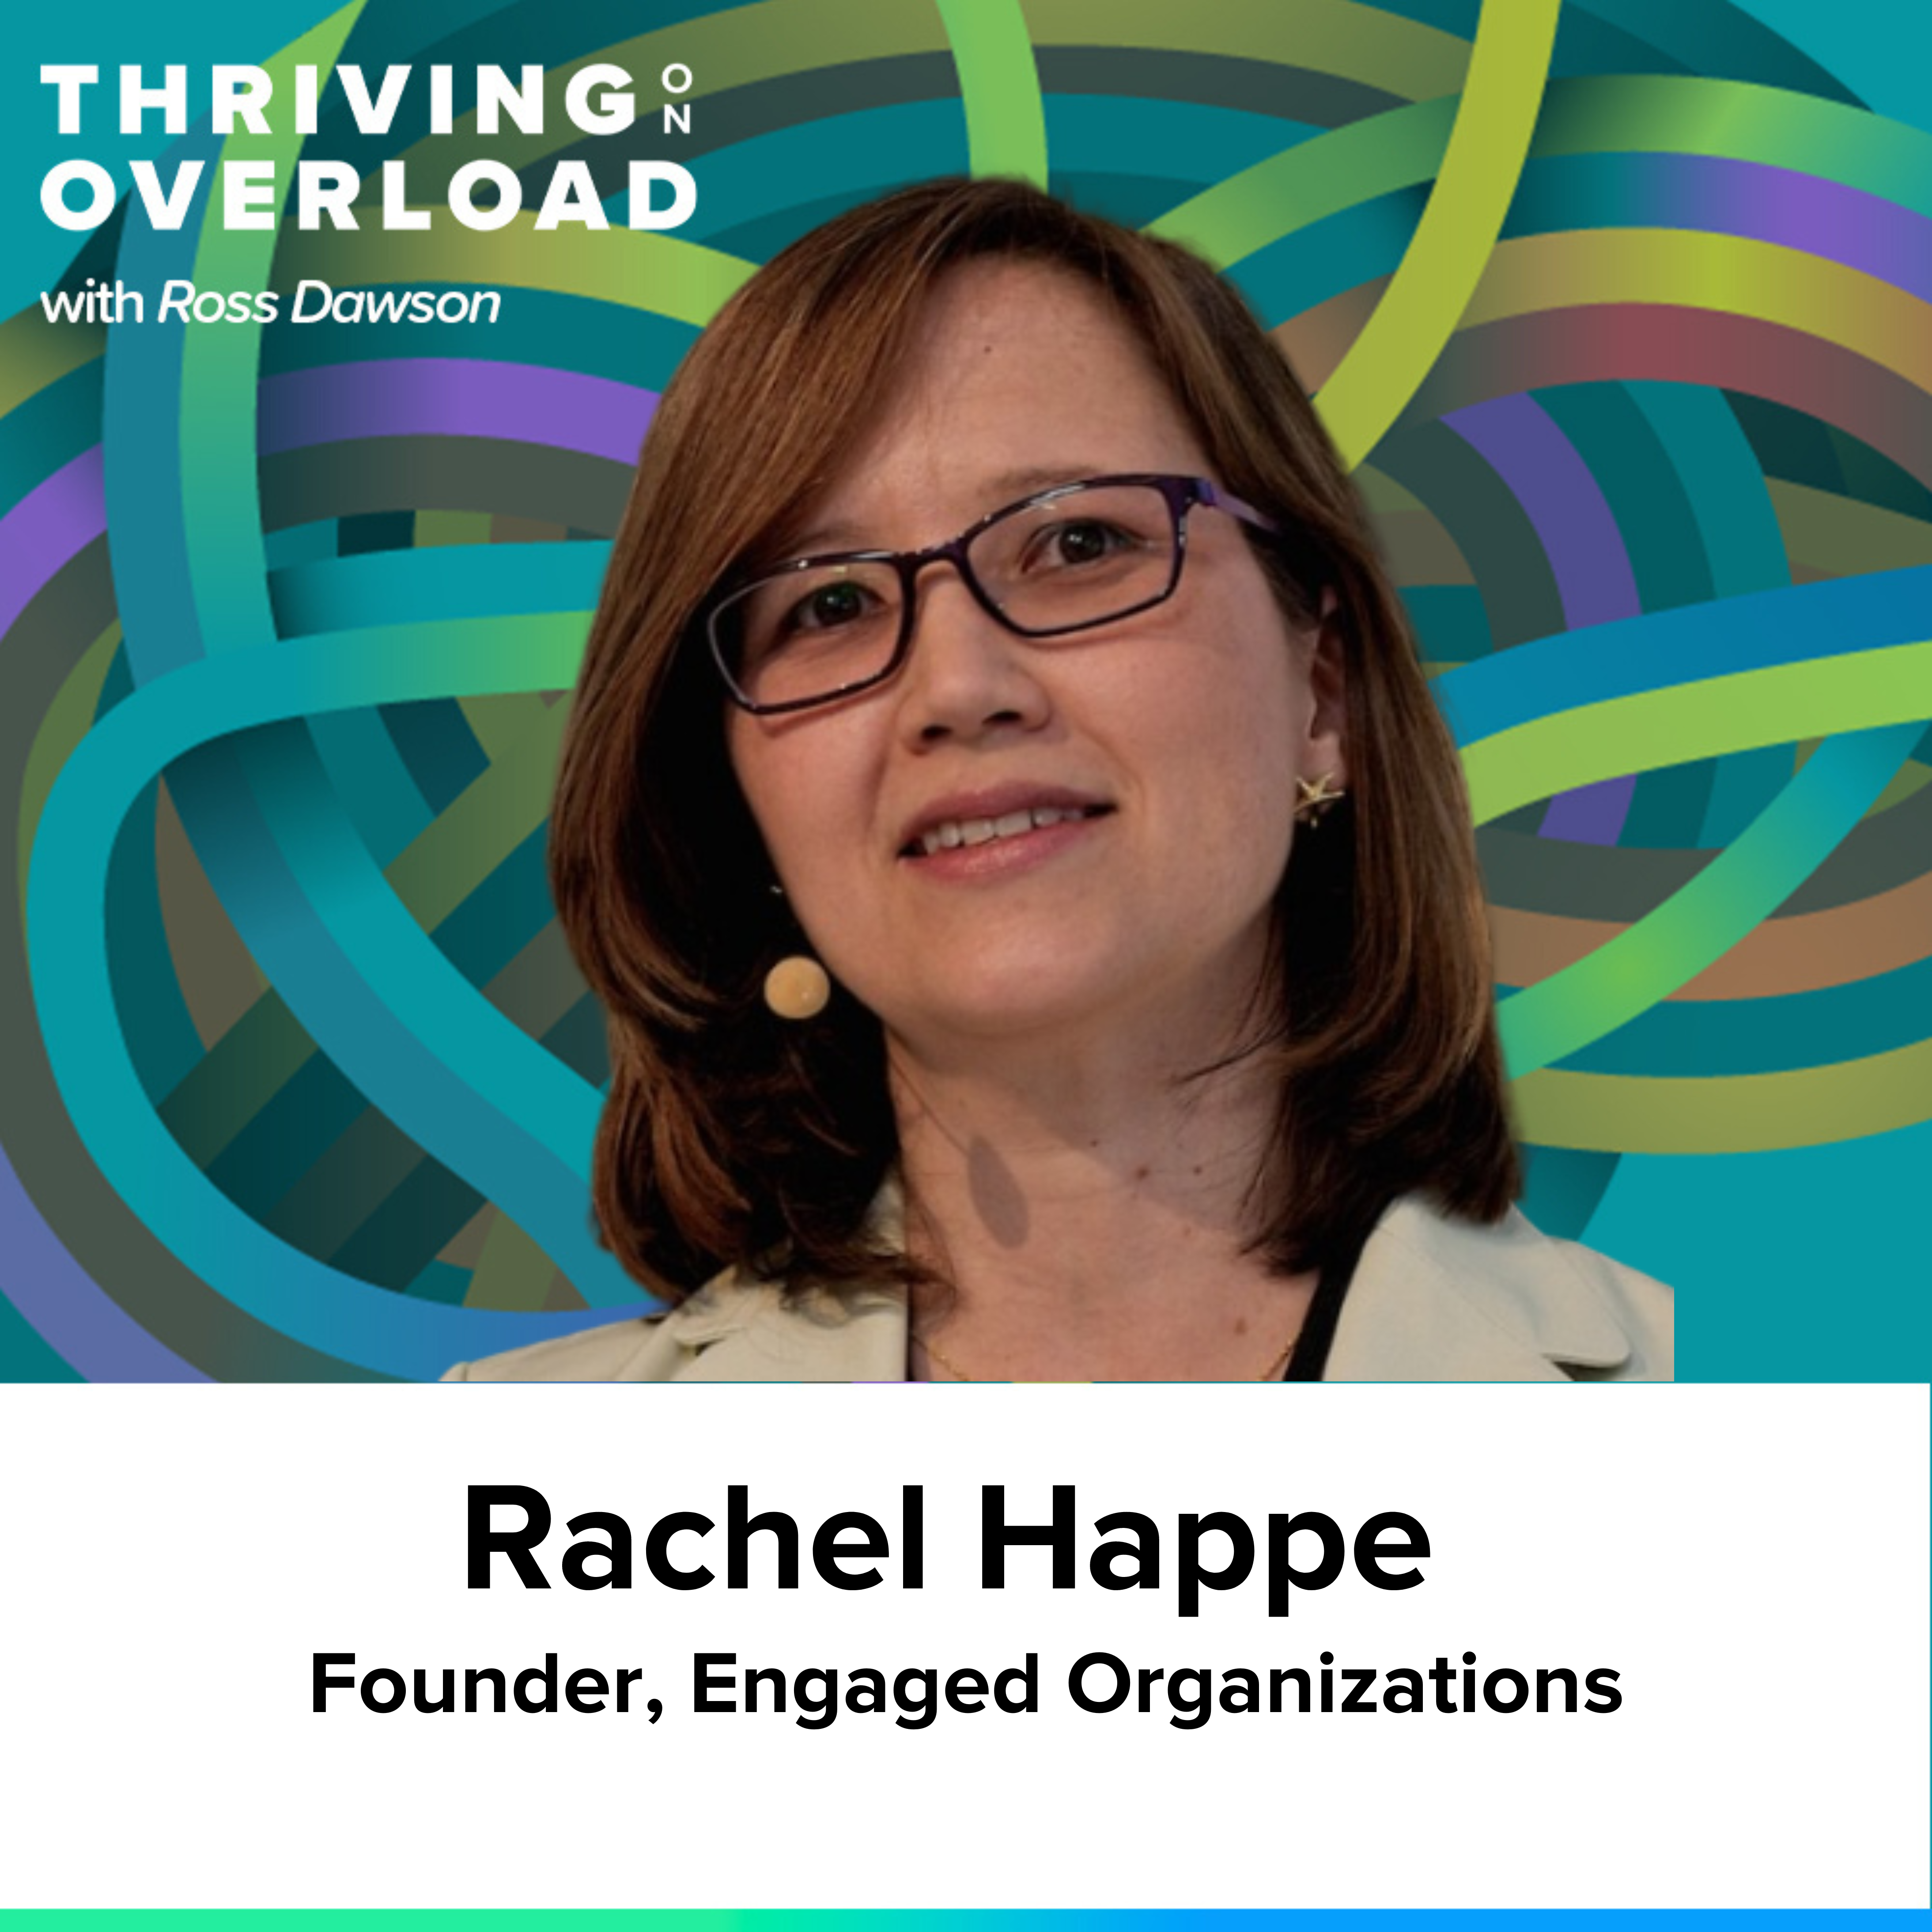 Rachel Happe on metacognition, communities of practice, personal knowledge networks, and intrinsic learning (Ep61)